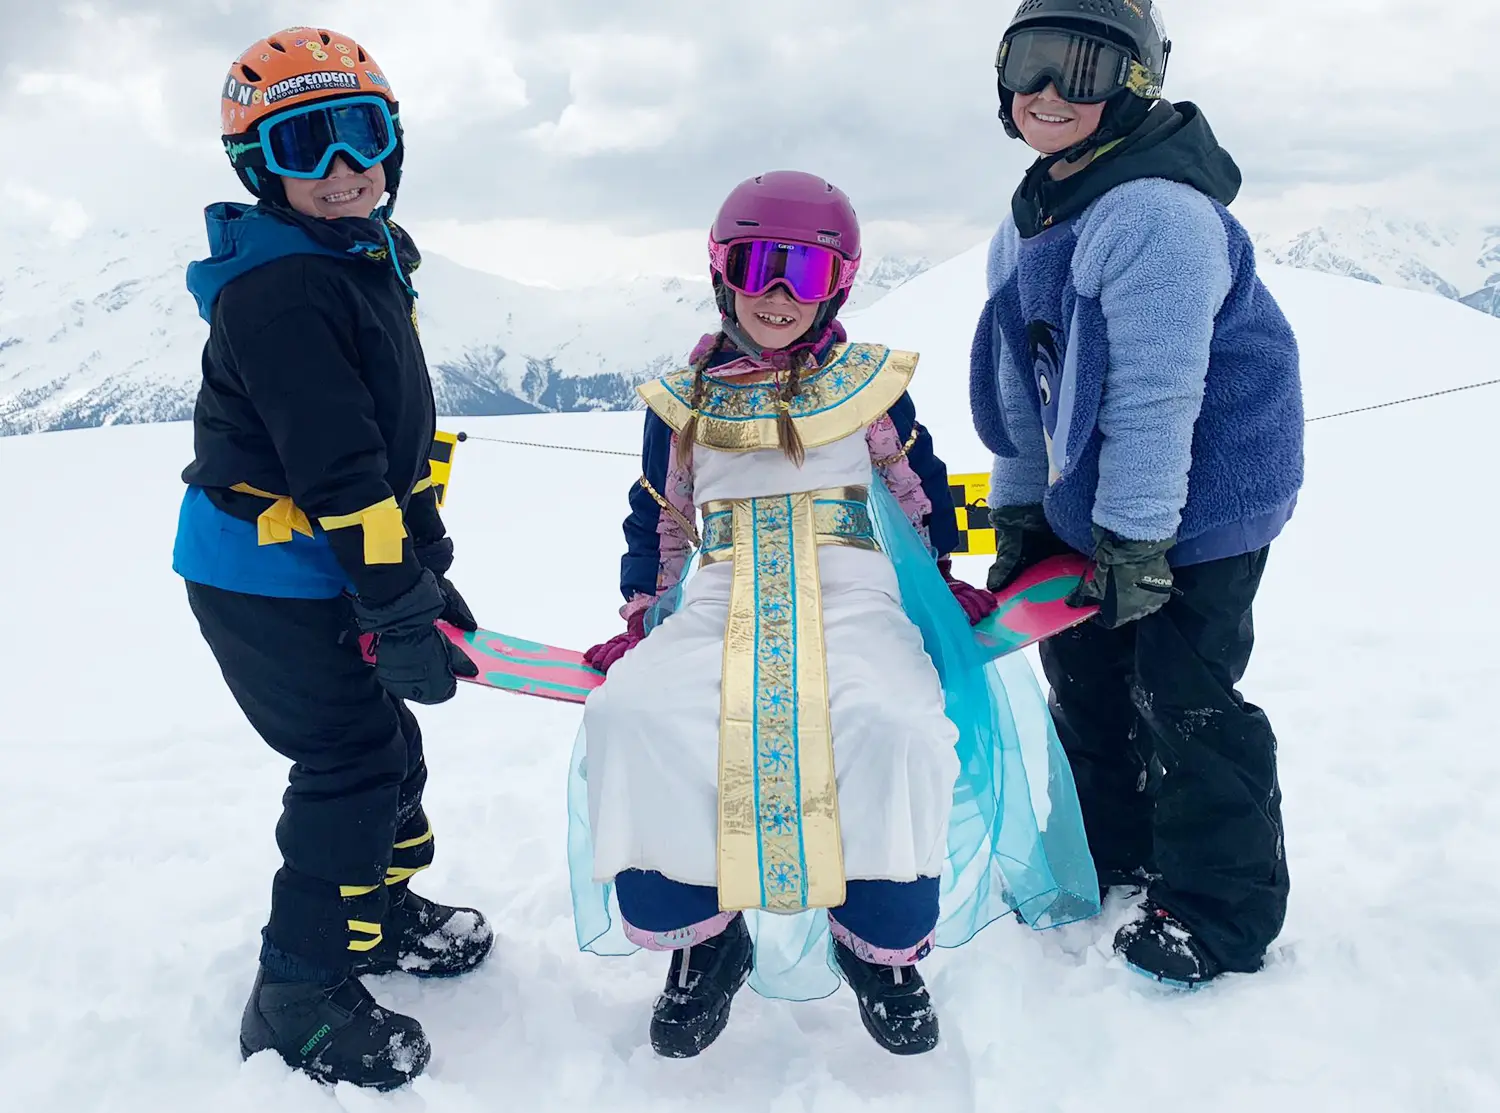 Free Snowboard event for kids in Verbier